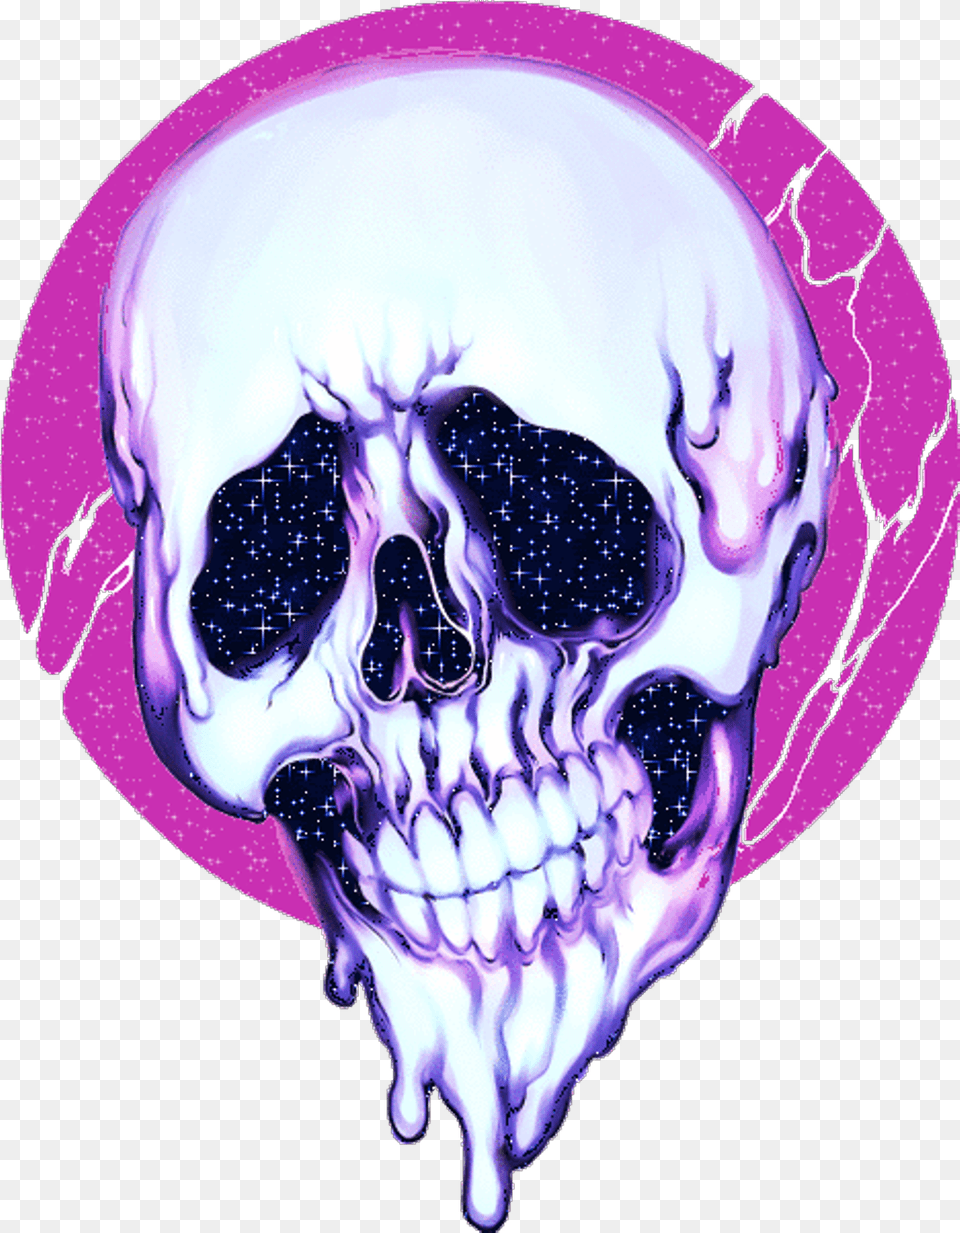 Skull Glitter Trippy Horror Aesthetic Pink Purple Aesthetic Skull, Baby, Person, Accessories, Ornament Png Image